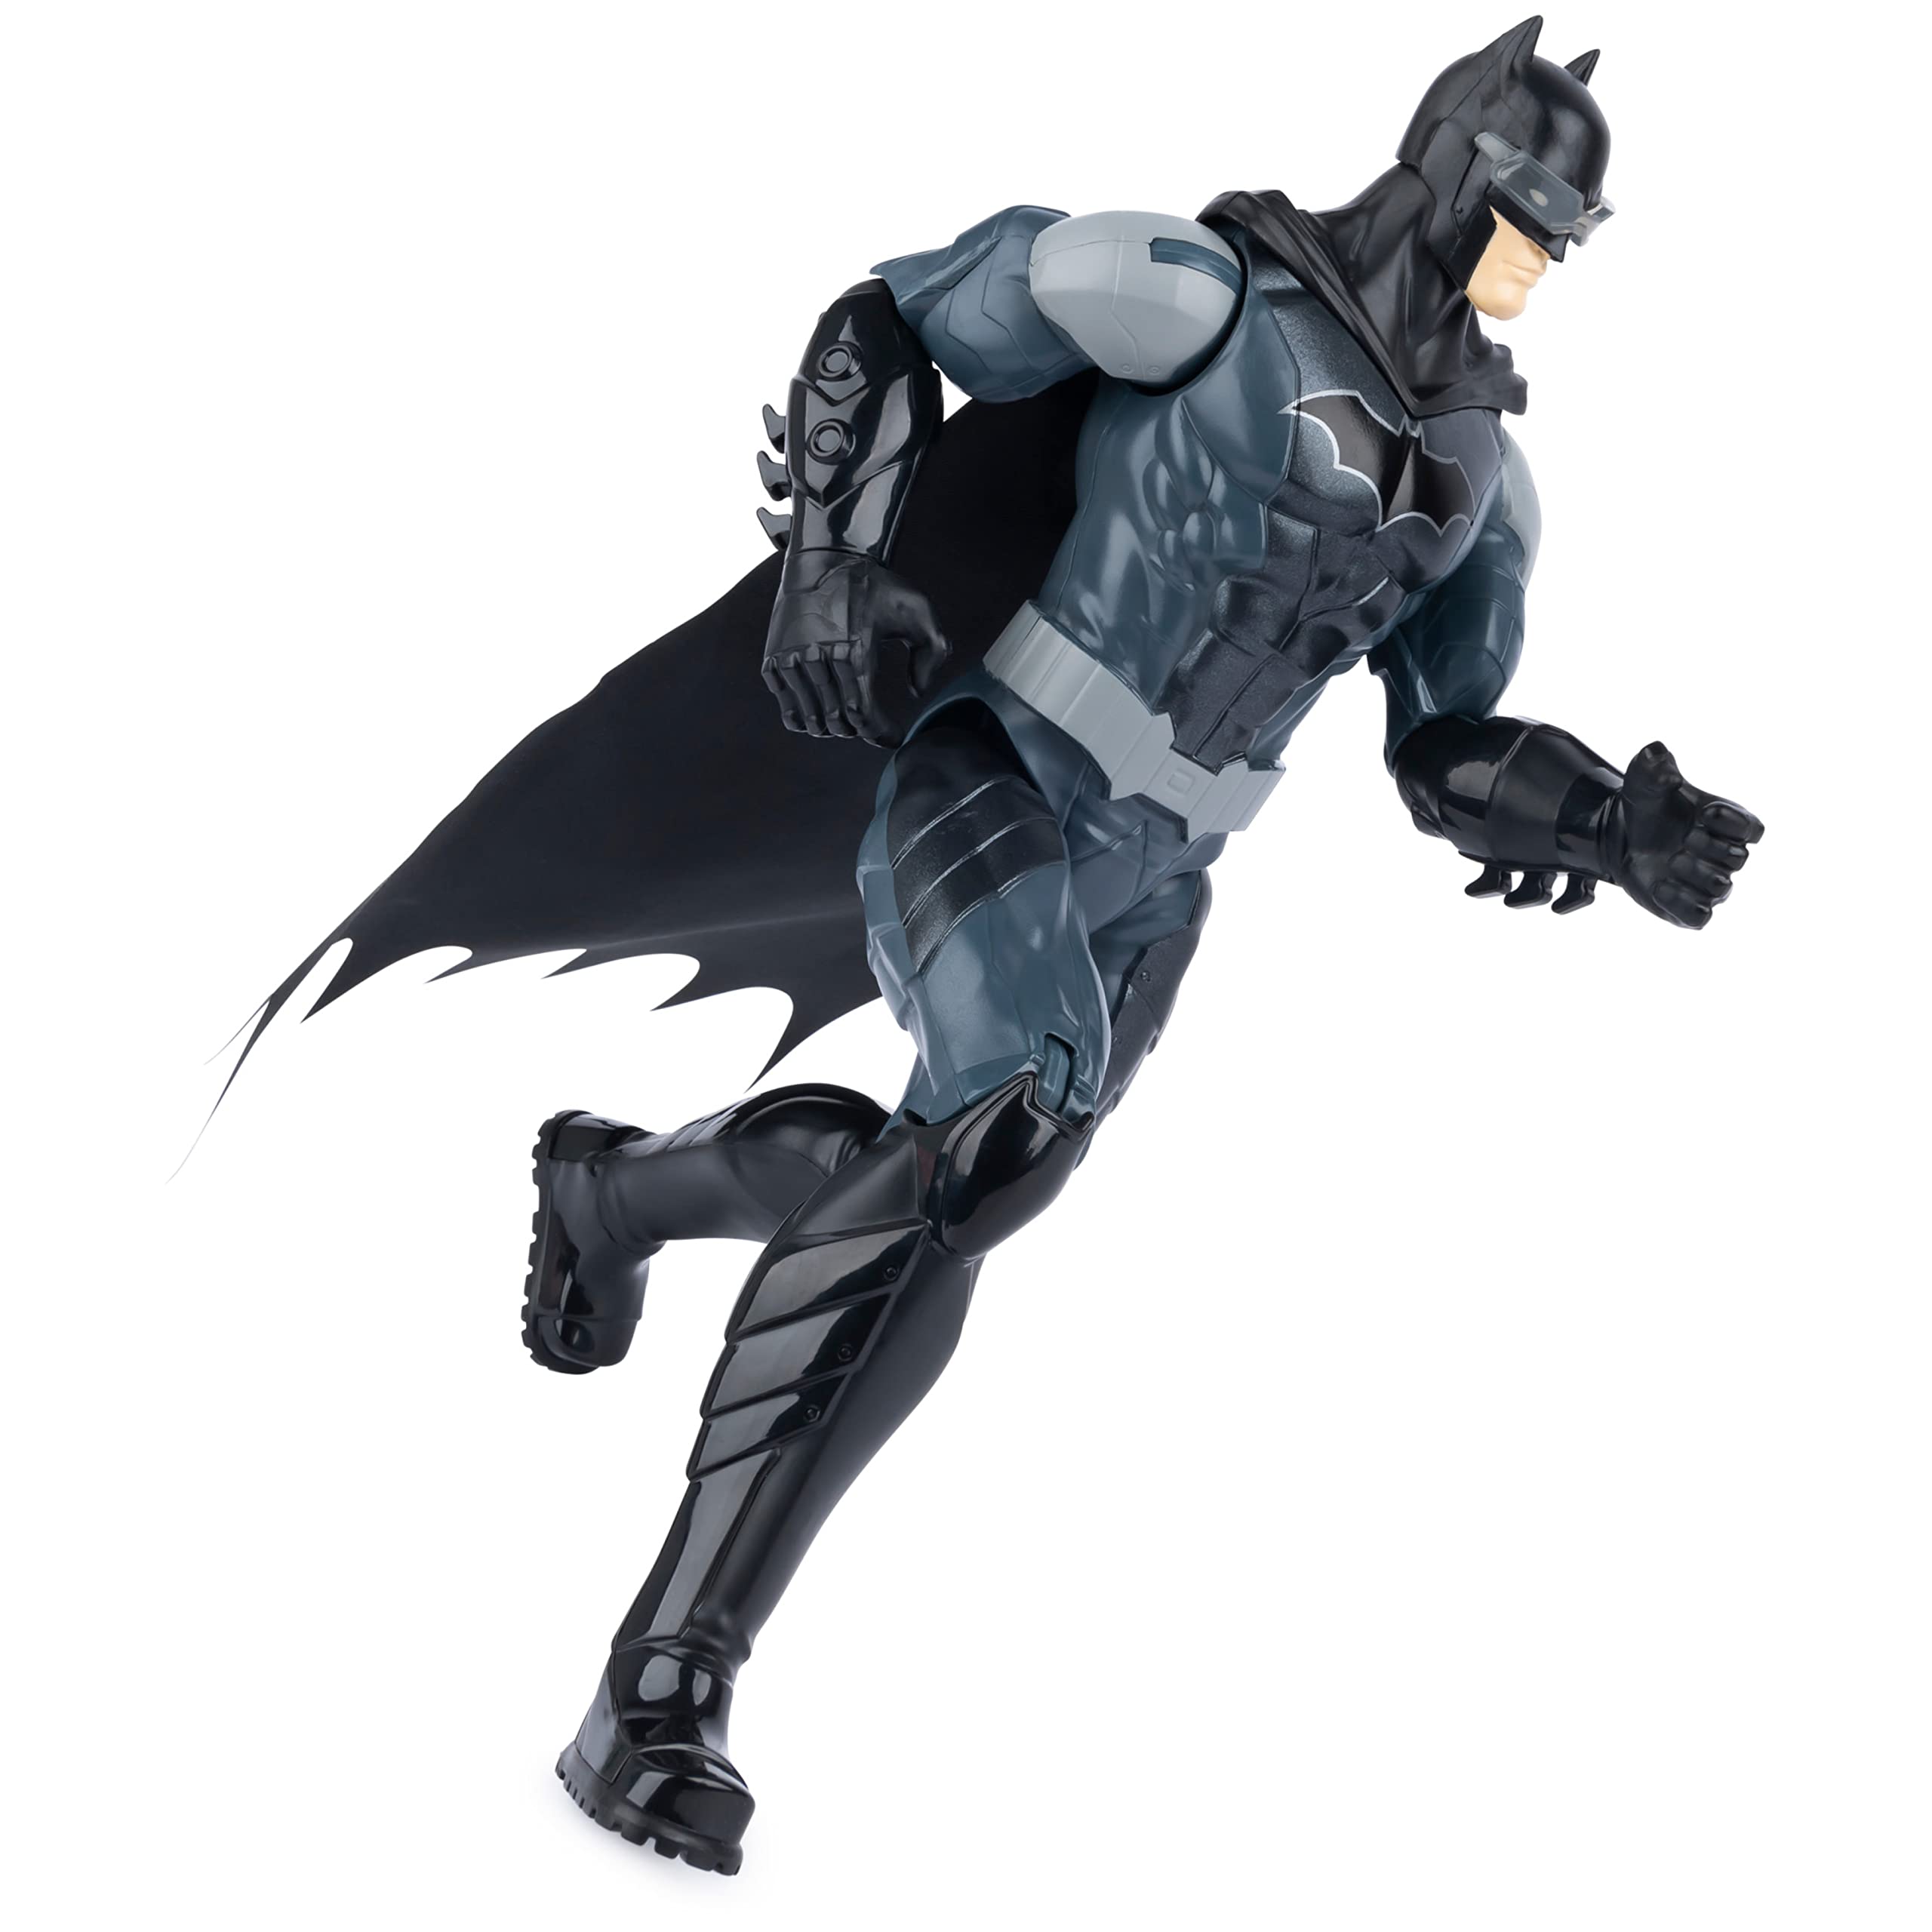 DC Comics, 12-inch Batman Action Figure, Kids Toys for Boys and Girls Ages 3 and Up